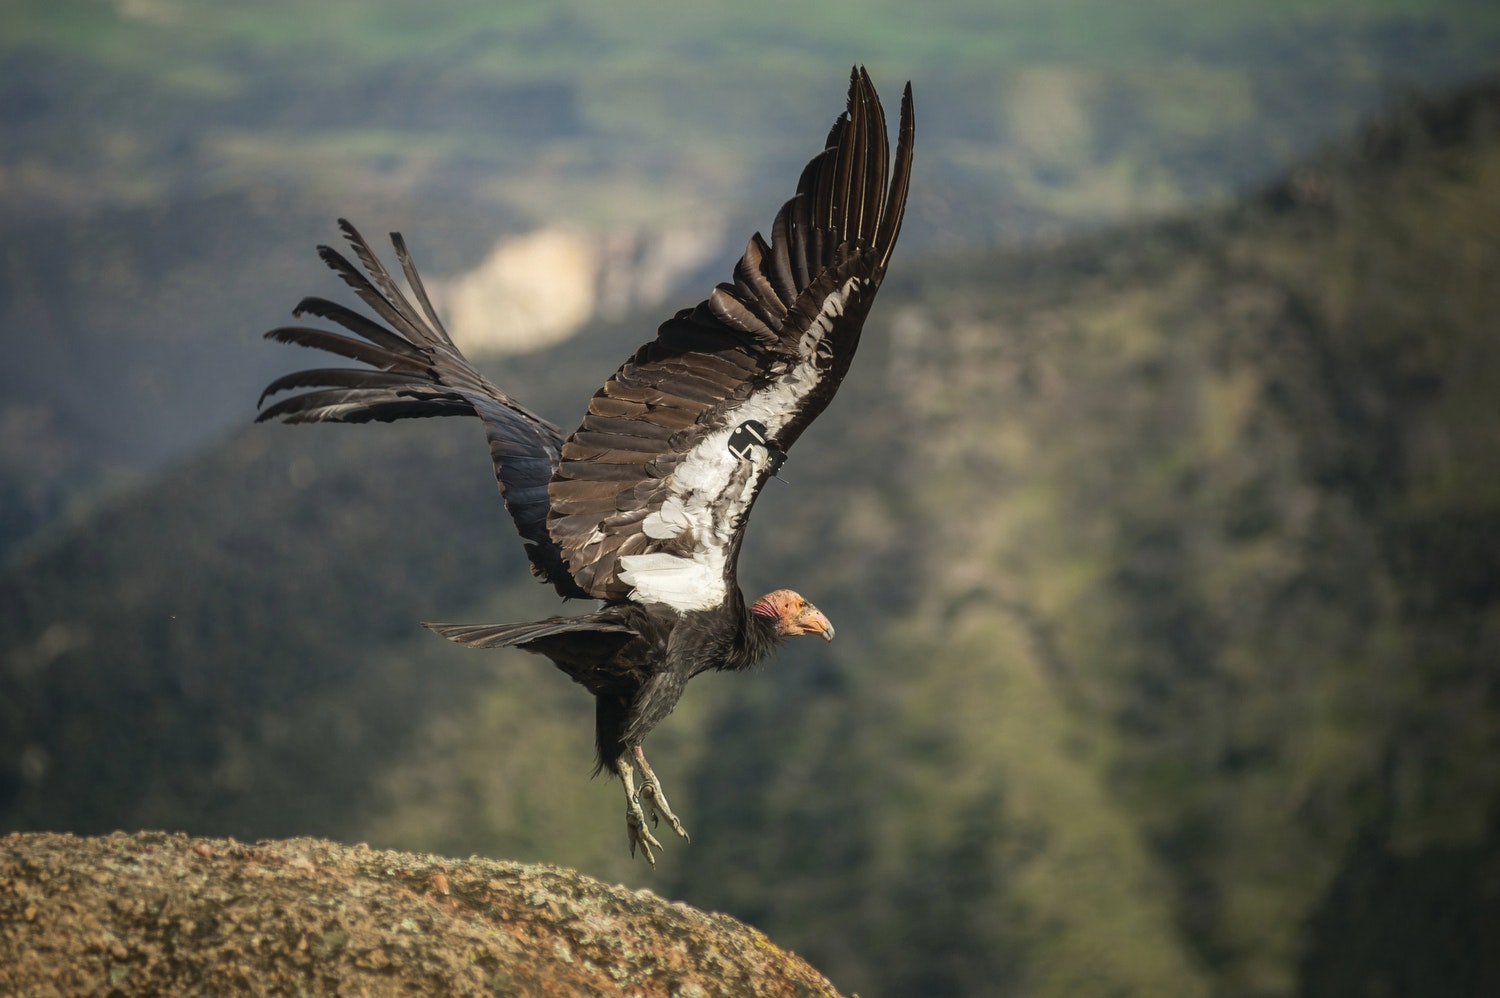 A condor stretches out its wings as it takes off from a rock